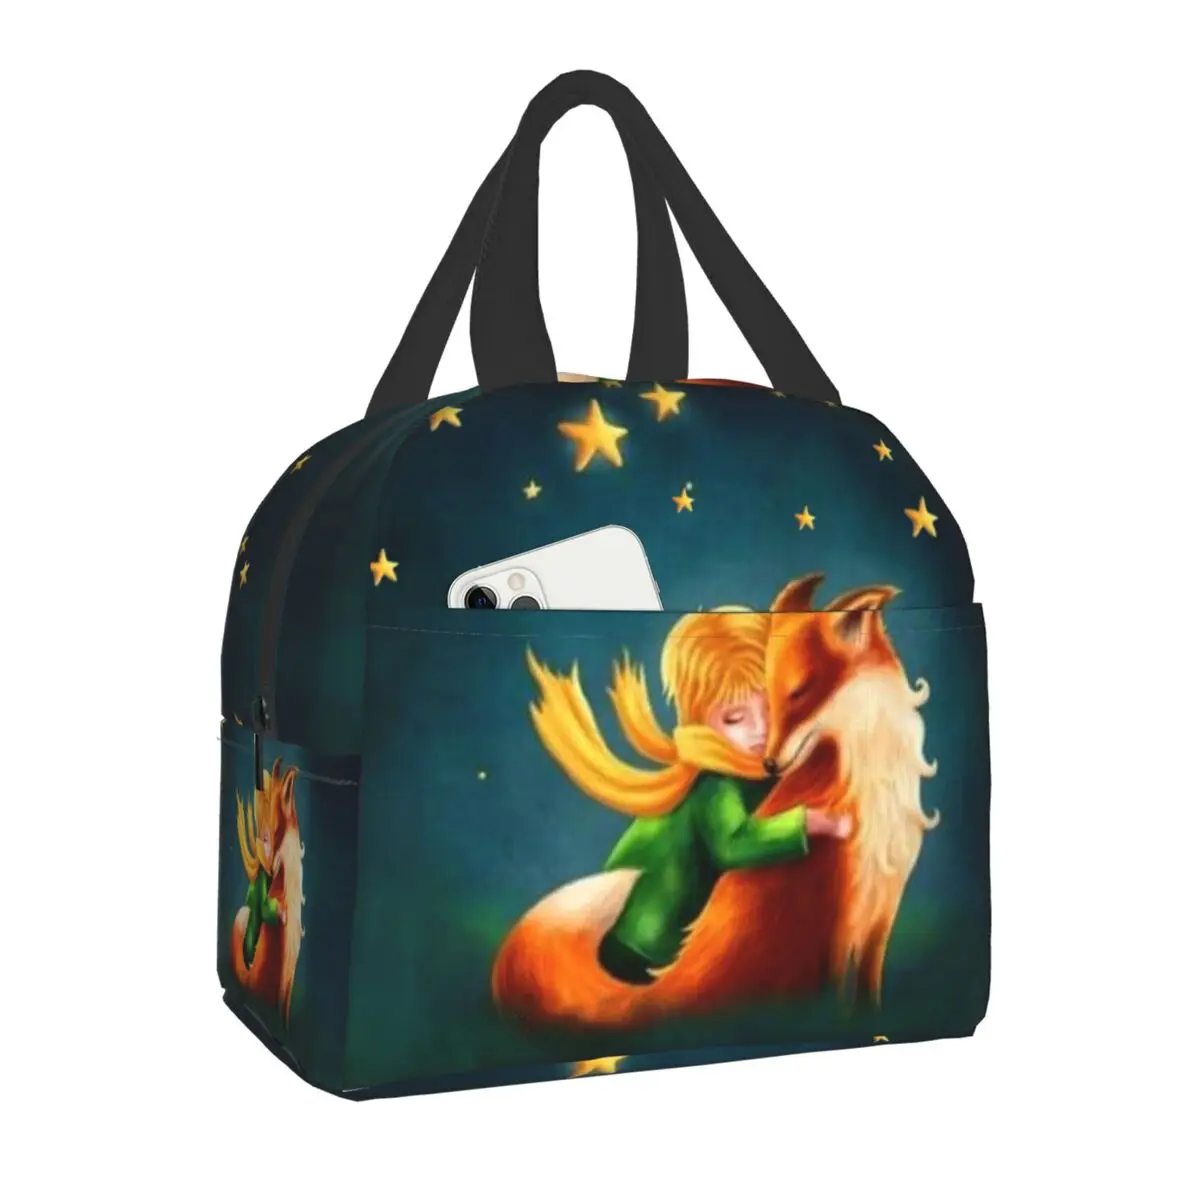 The Little Prince Fairy Tale Lunch Bag Men Women Cooler Thermal Insulated Lunch Box for Children School Tote Picnic Storage Bag